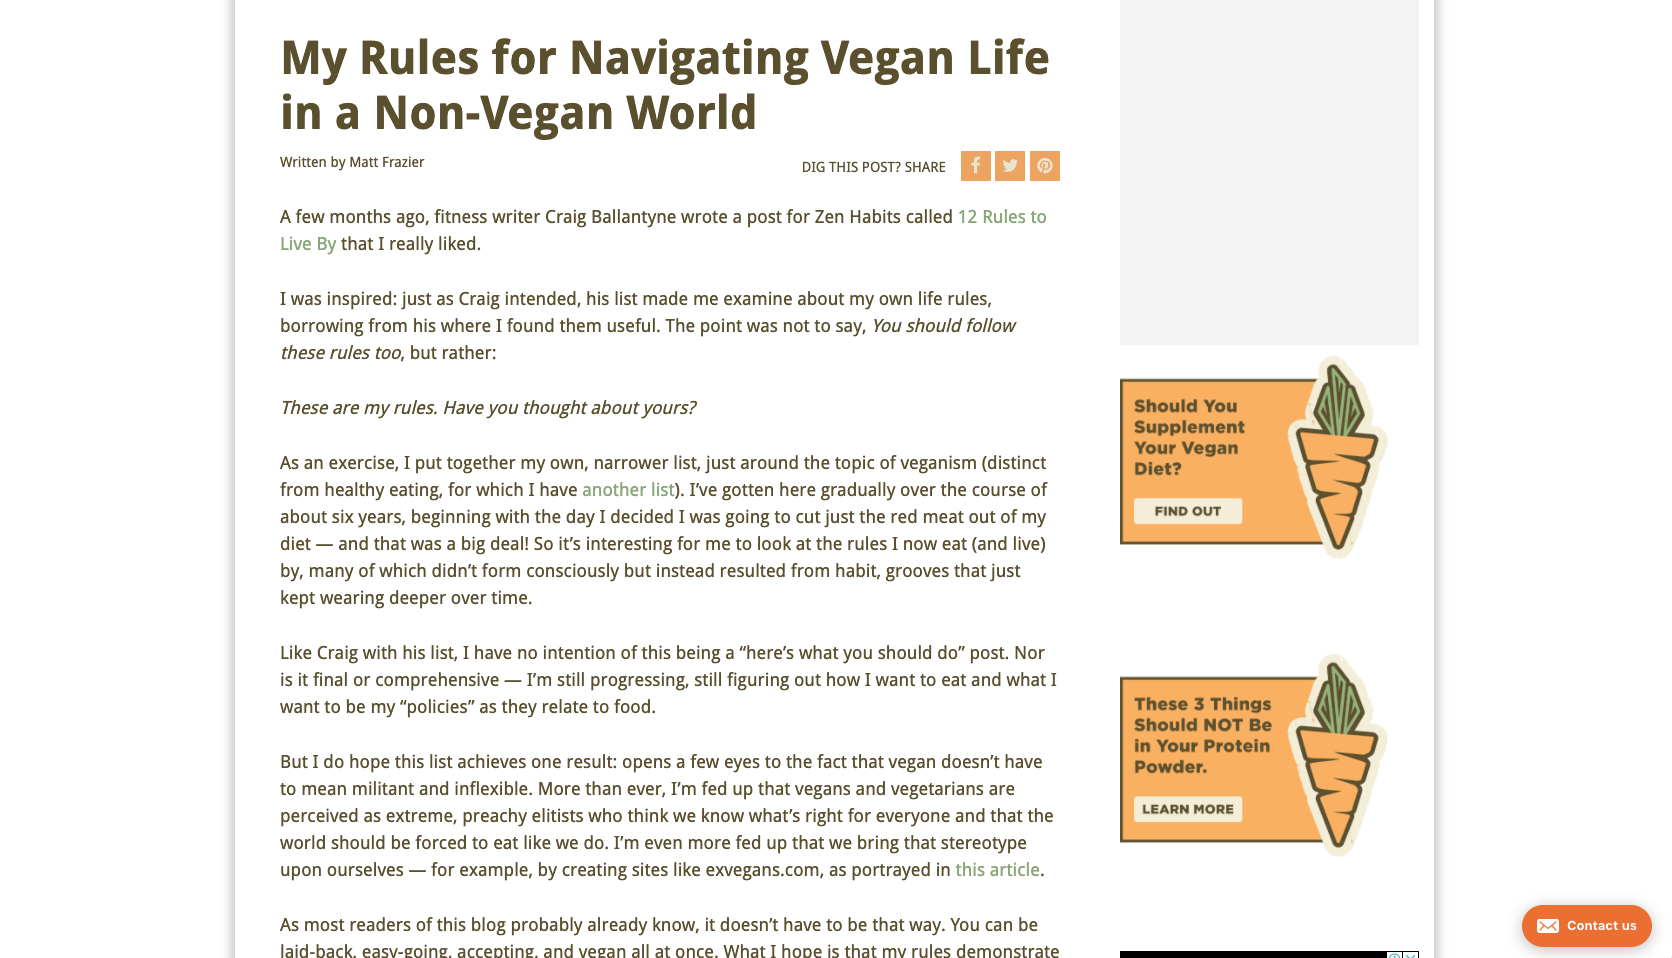 My Rules for Navigating Vegan Life in a Non Vegan World